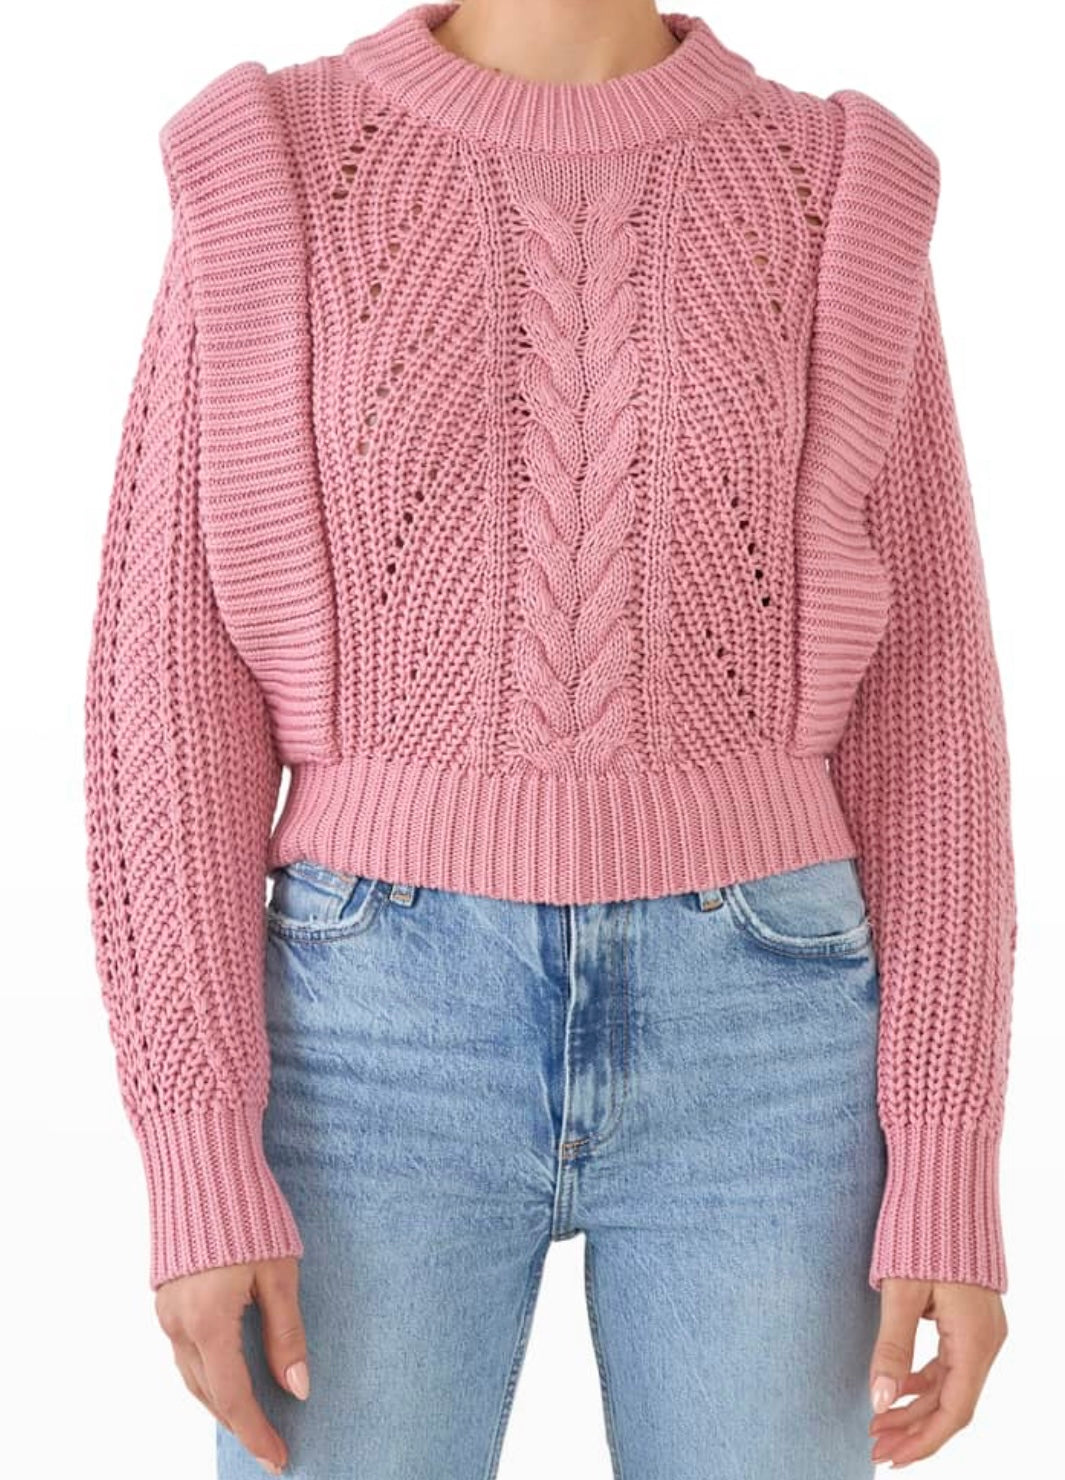 Cozy Knitted Sweater